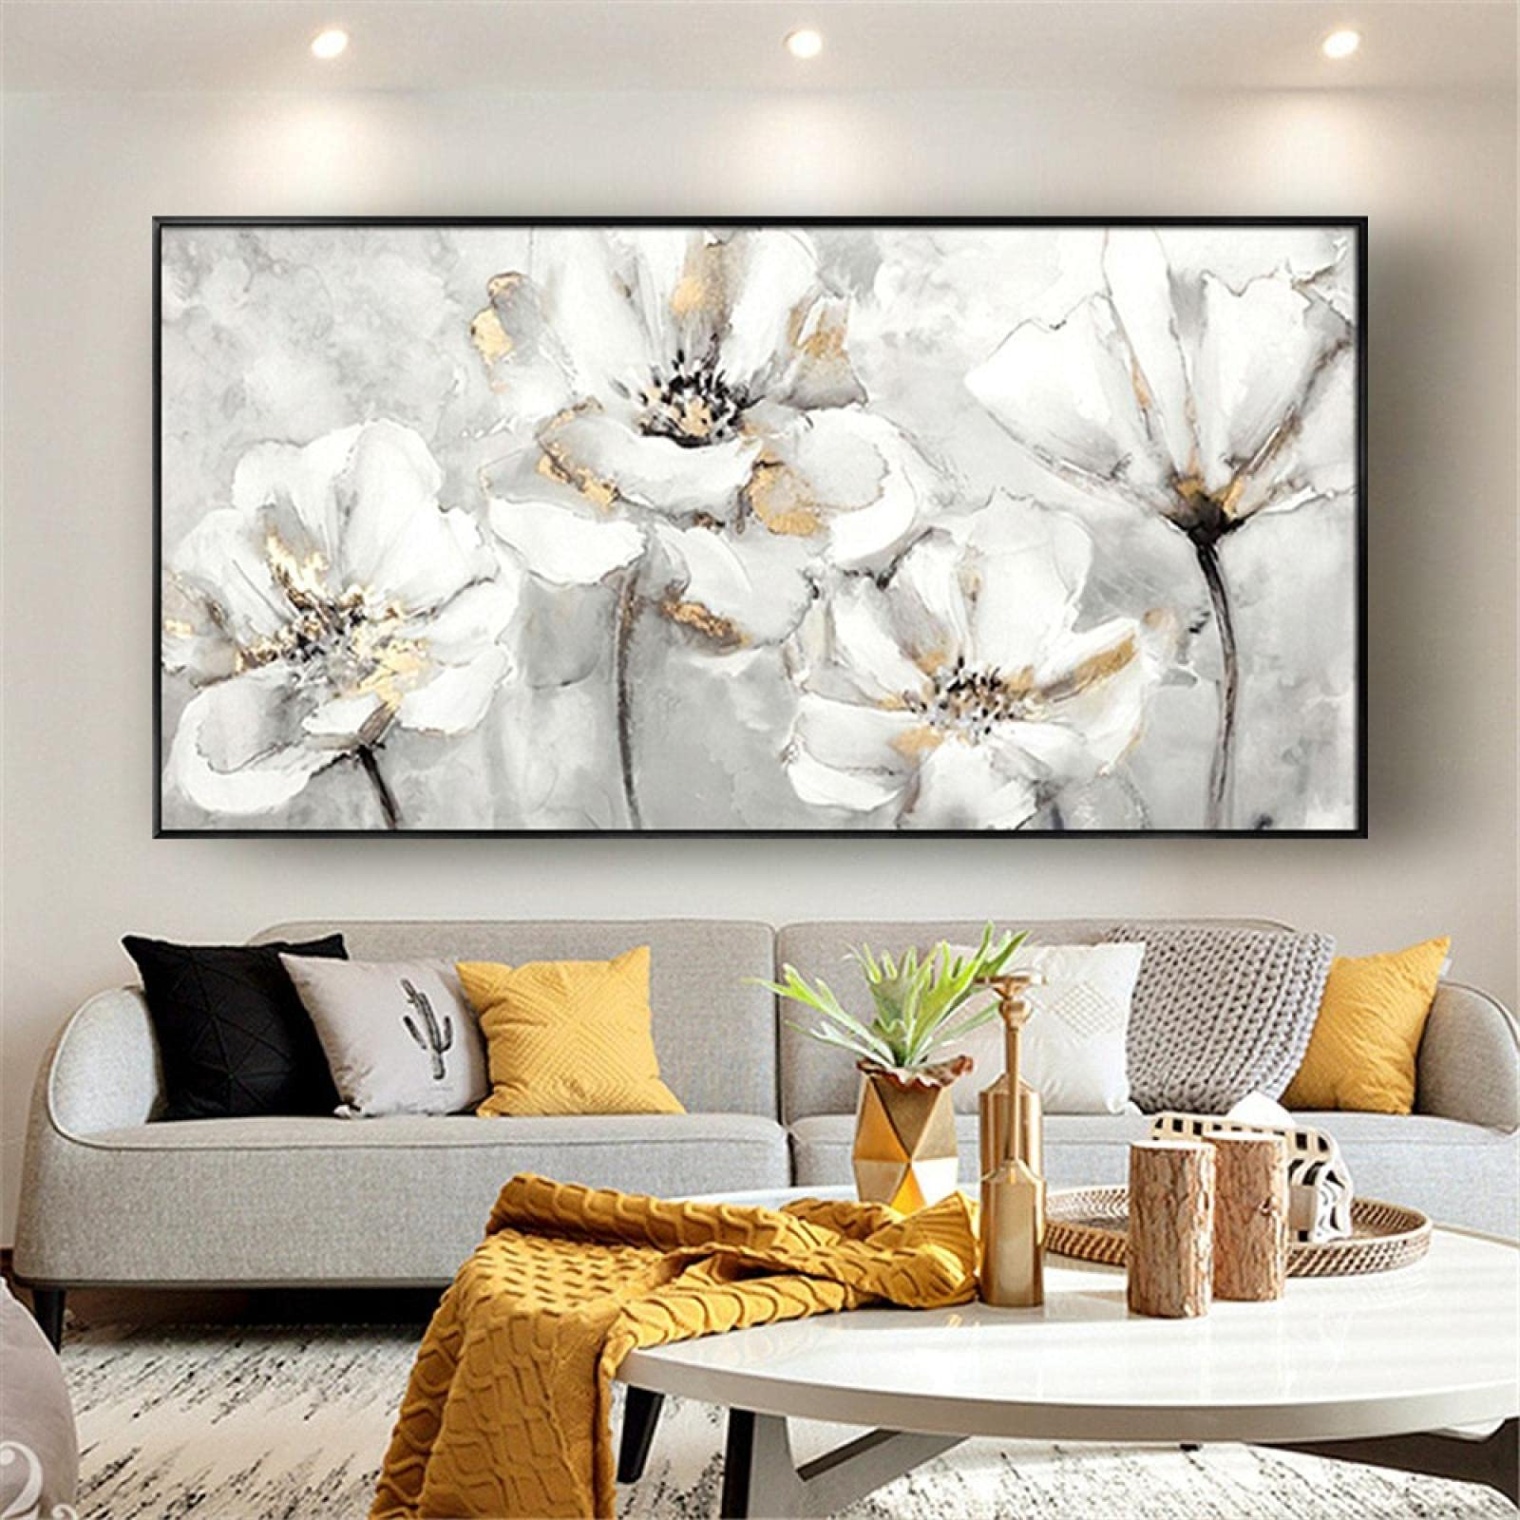 home decor art Niche Utama Home Chinese Mural Modern Living Room Decor Sofa Flower Painting Large Canvas  Wall Art Pictures For Home Decor Artwork xcm/xin With-Black-Frame